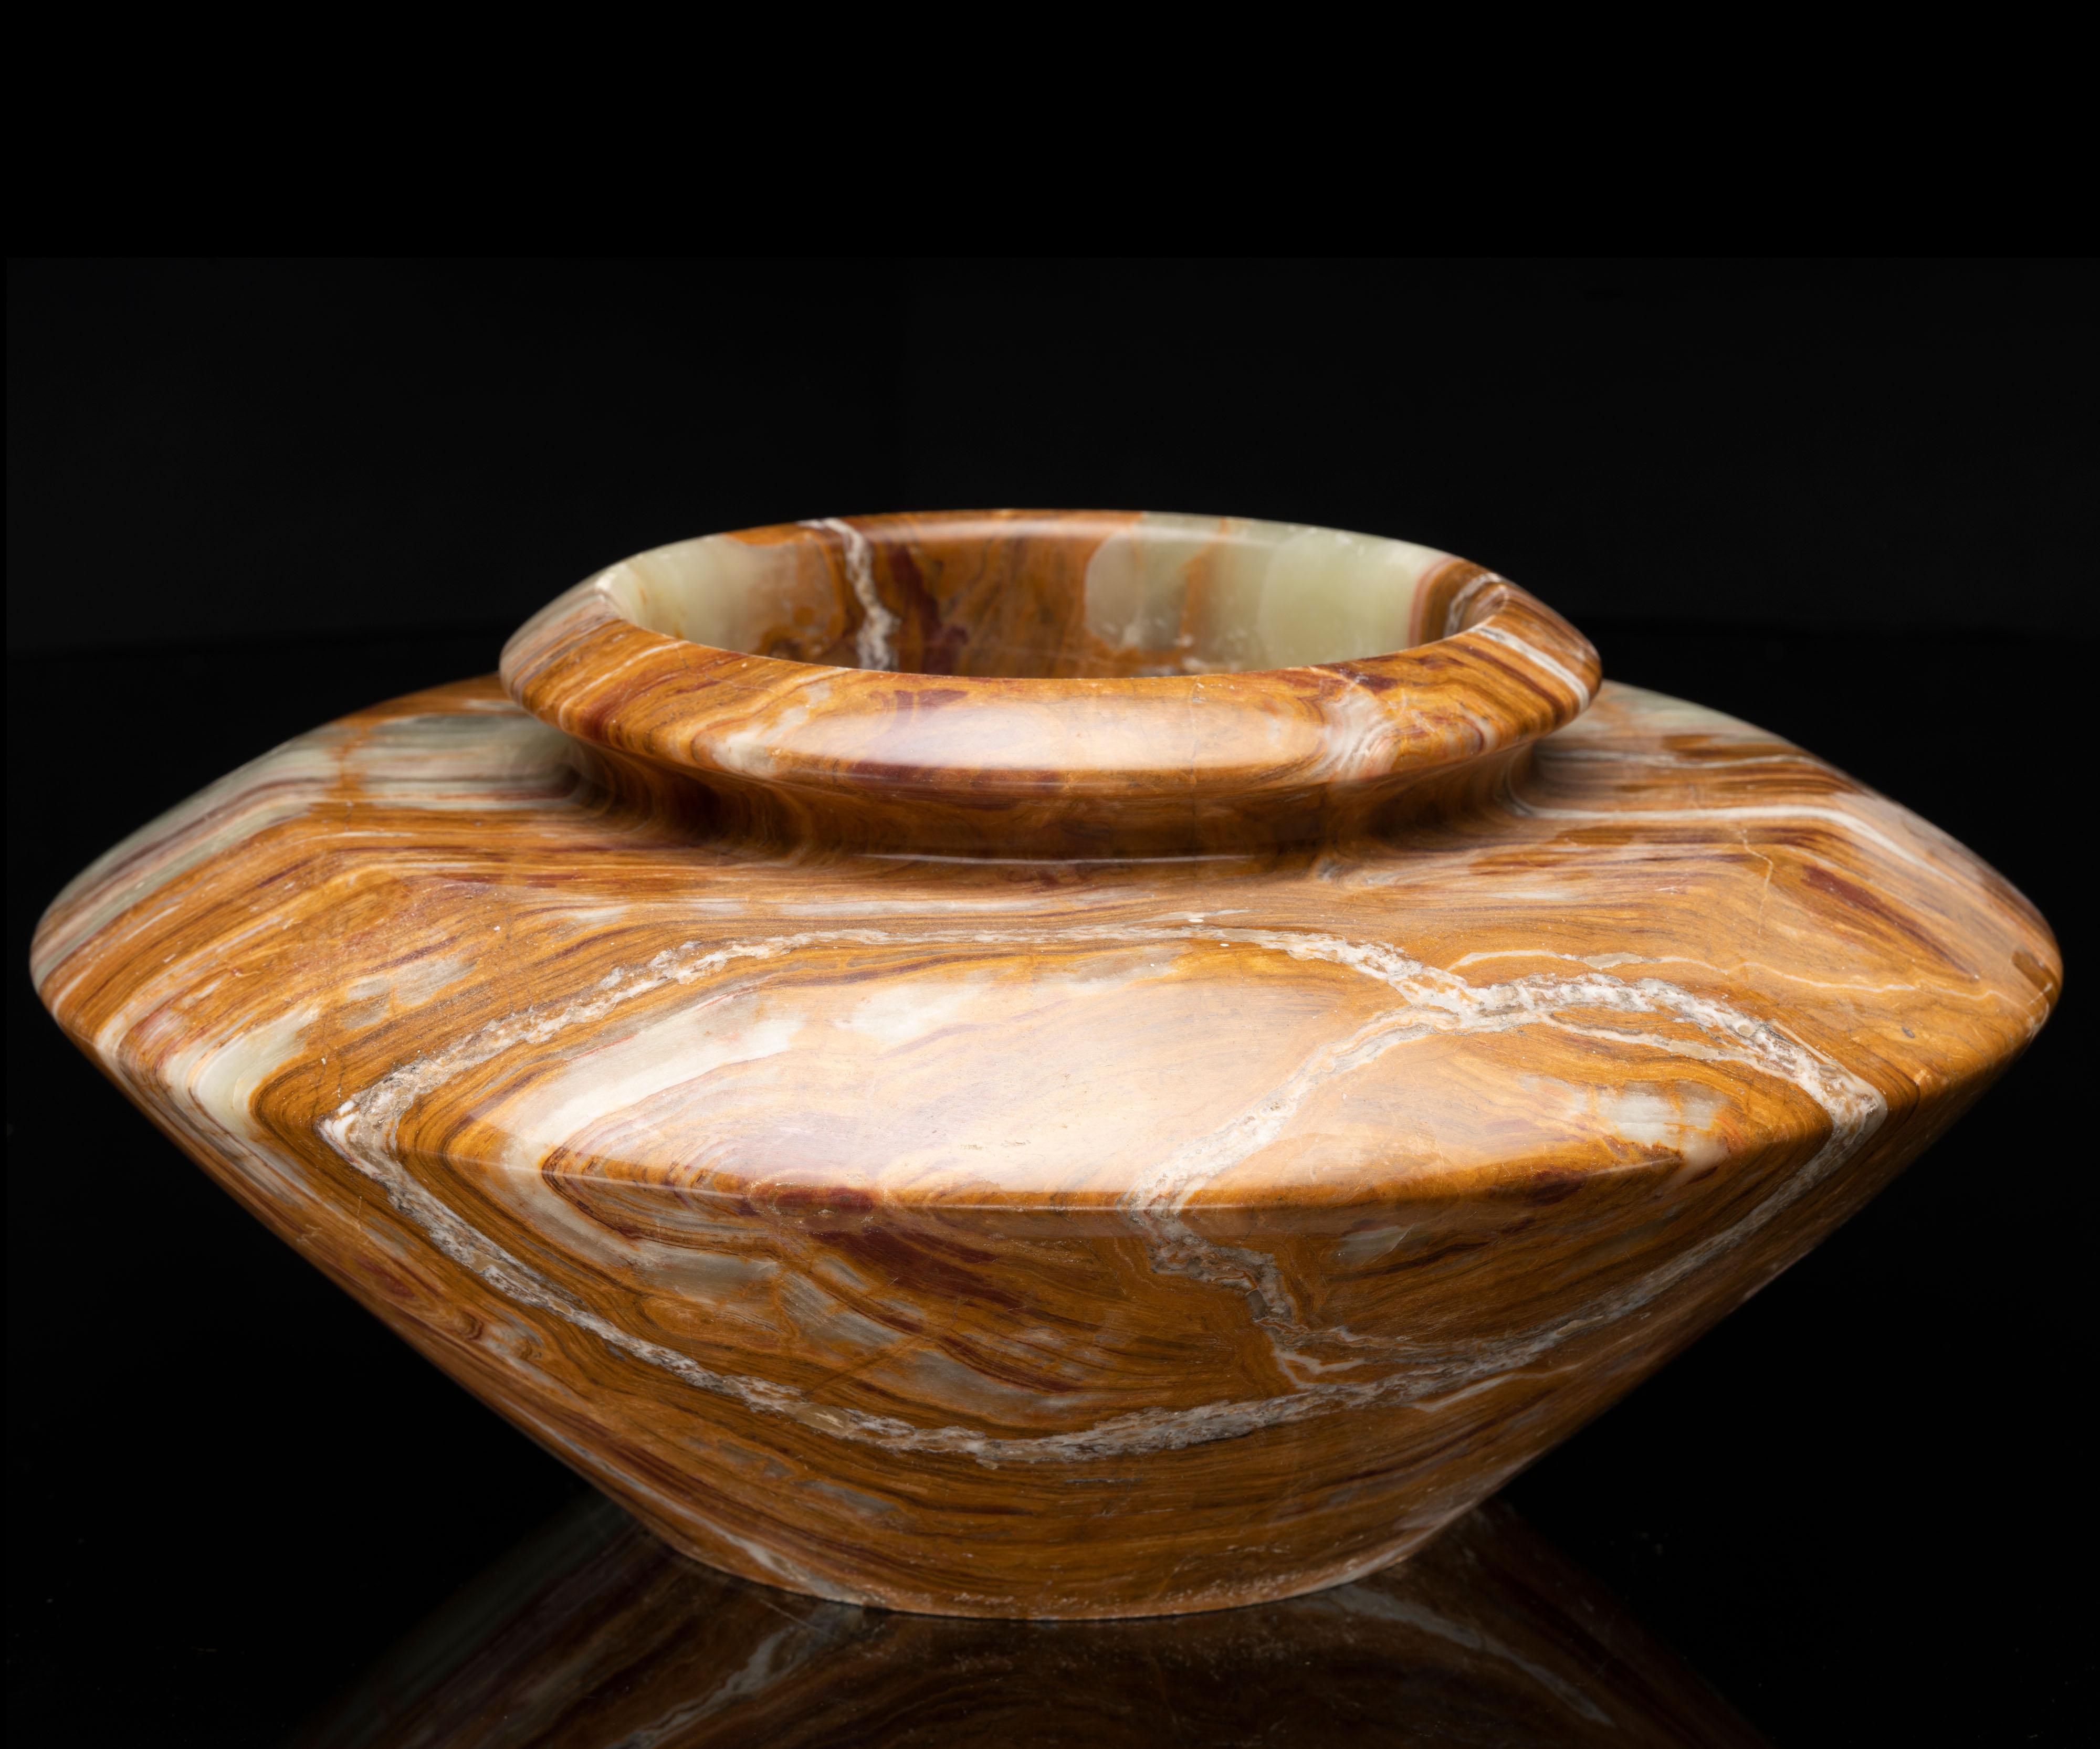 This beautifully hand-carved flowerpot is hewn out of one solid piece of high quality banded onyx from Pakistan. With rich brown, verdant green, and tan bands and swirls, this AAA décor piece will enhance any room and provide a lovely place for a